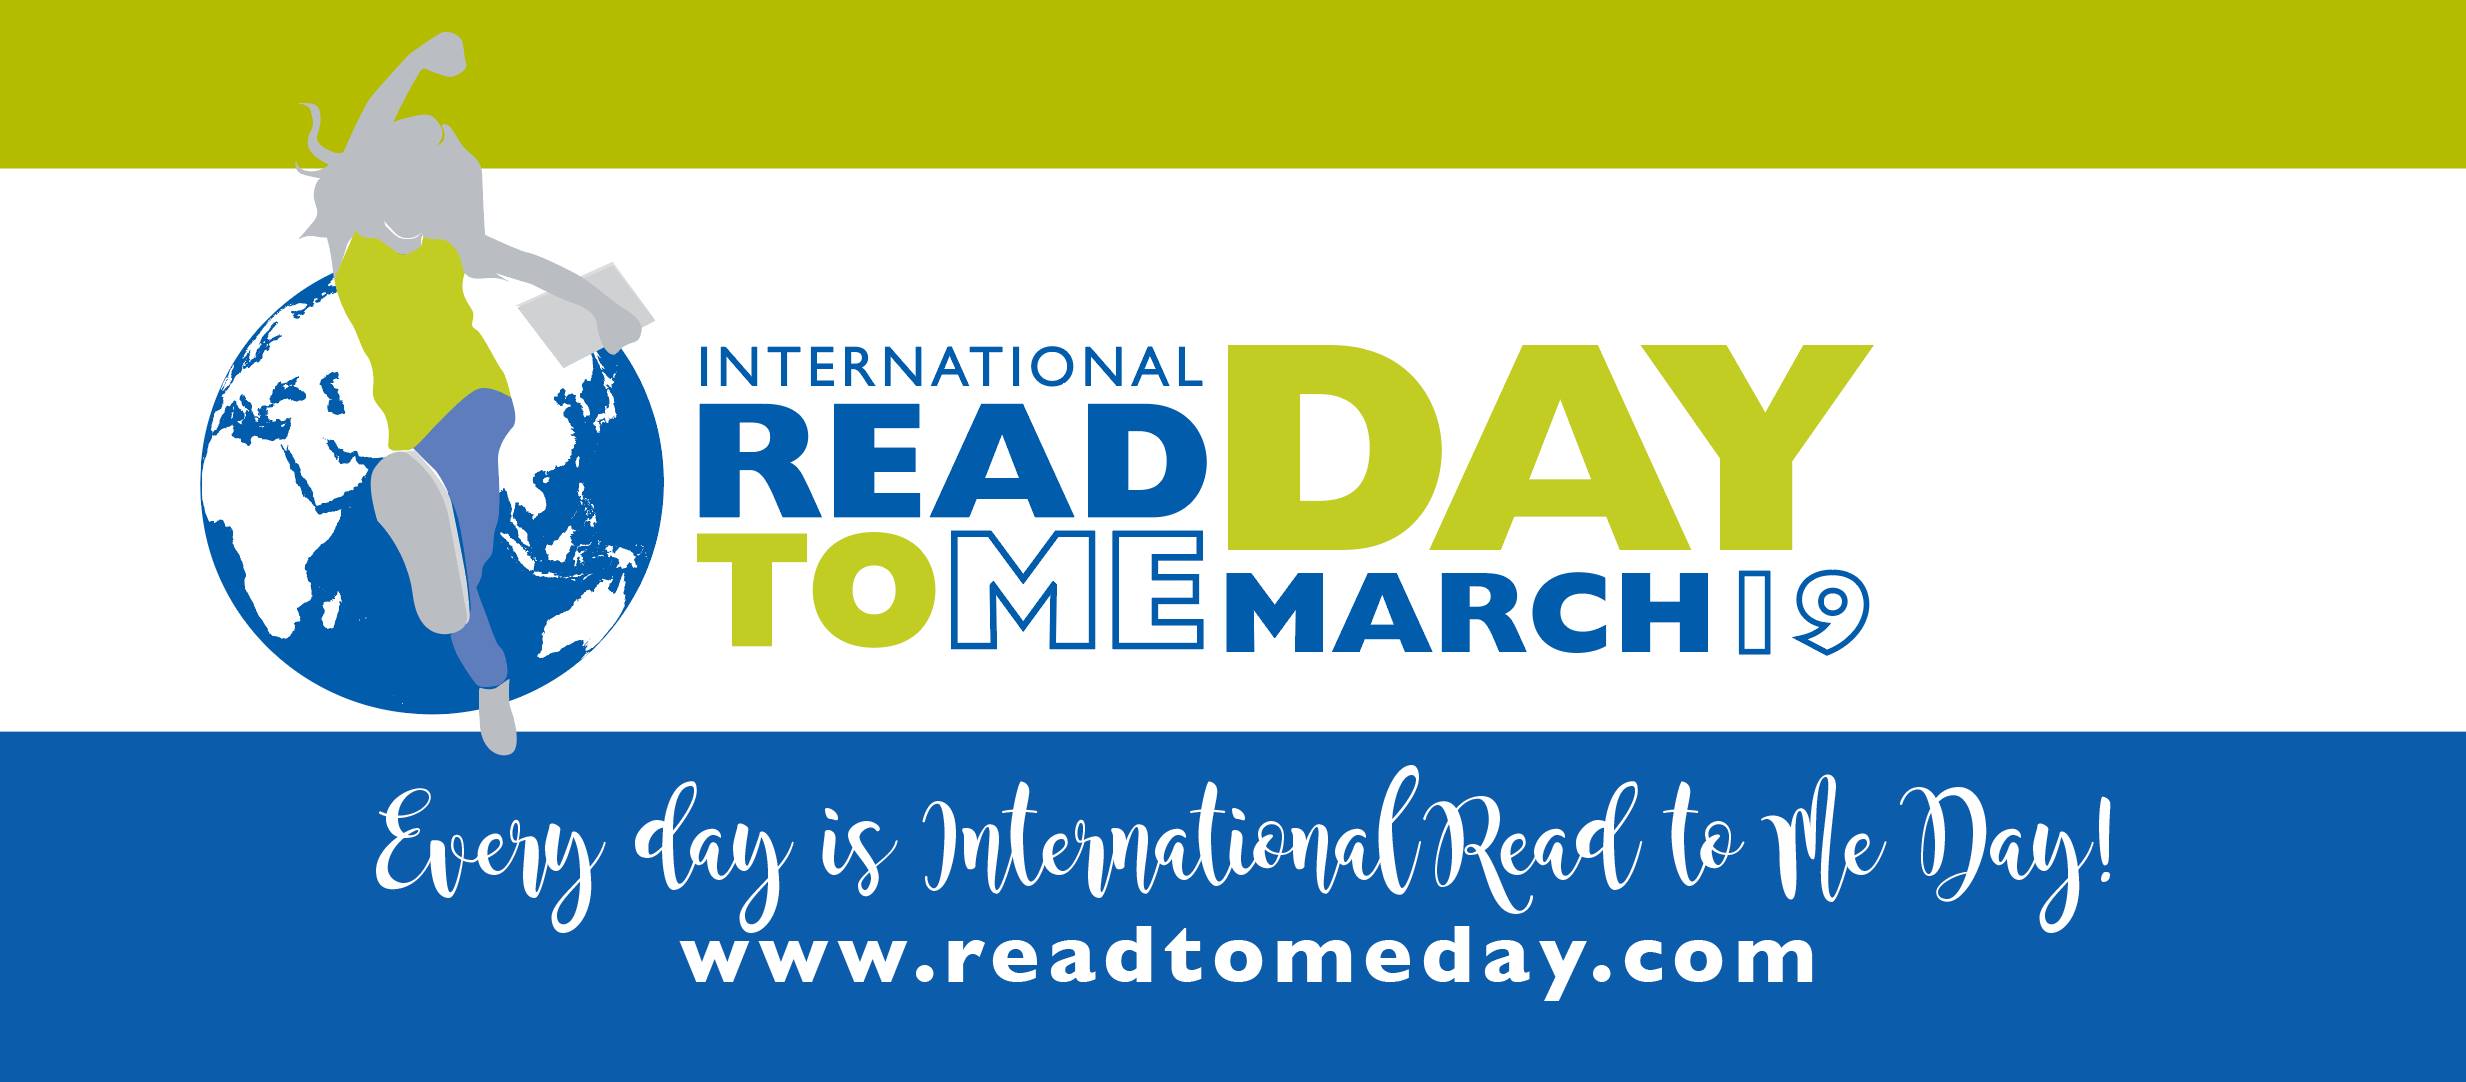 Internationaler Read to Me Day